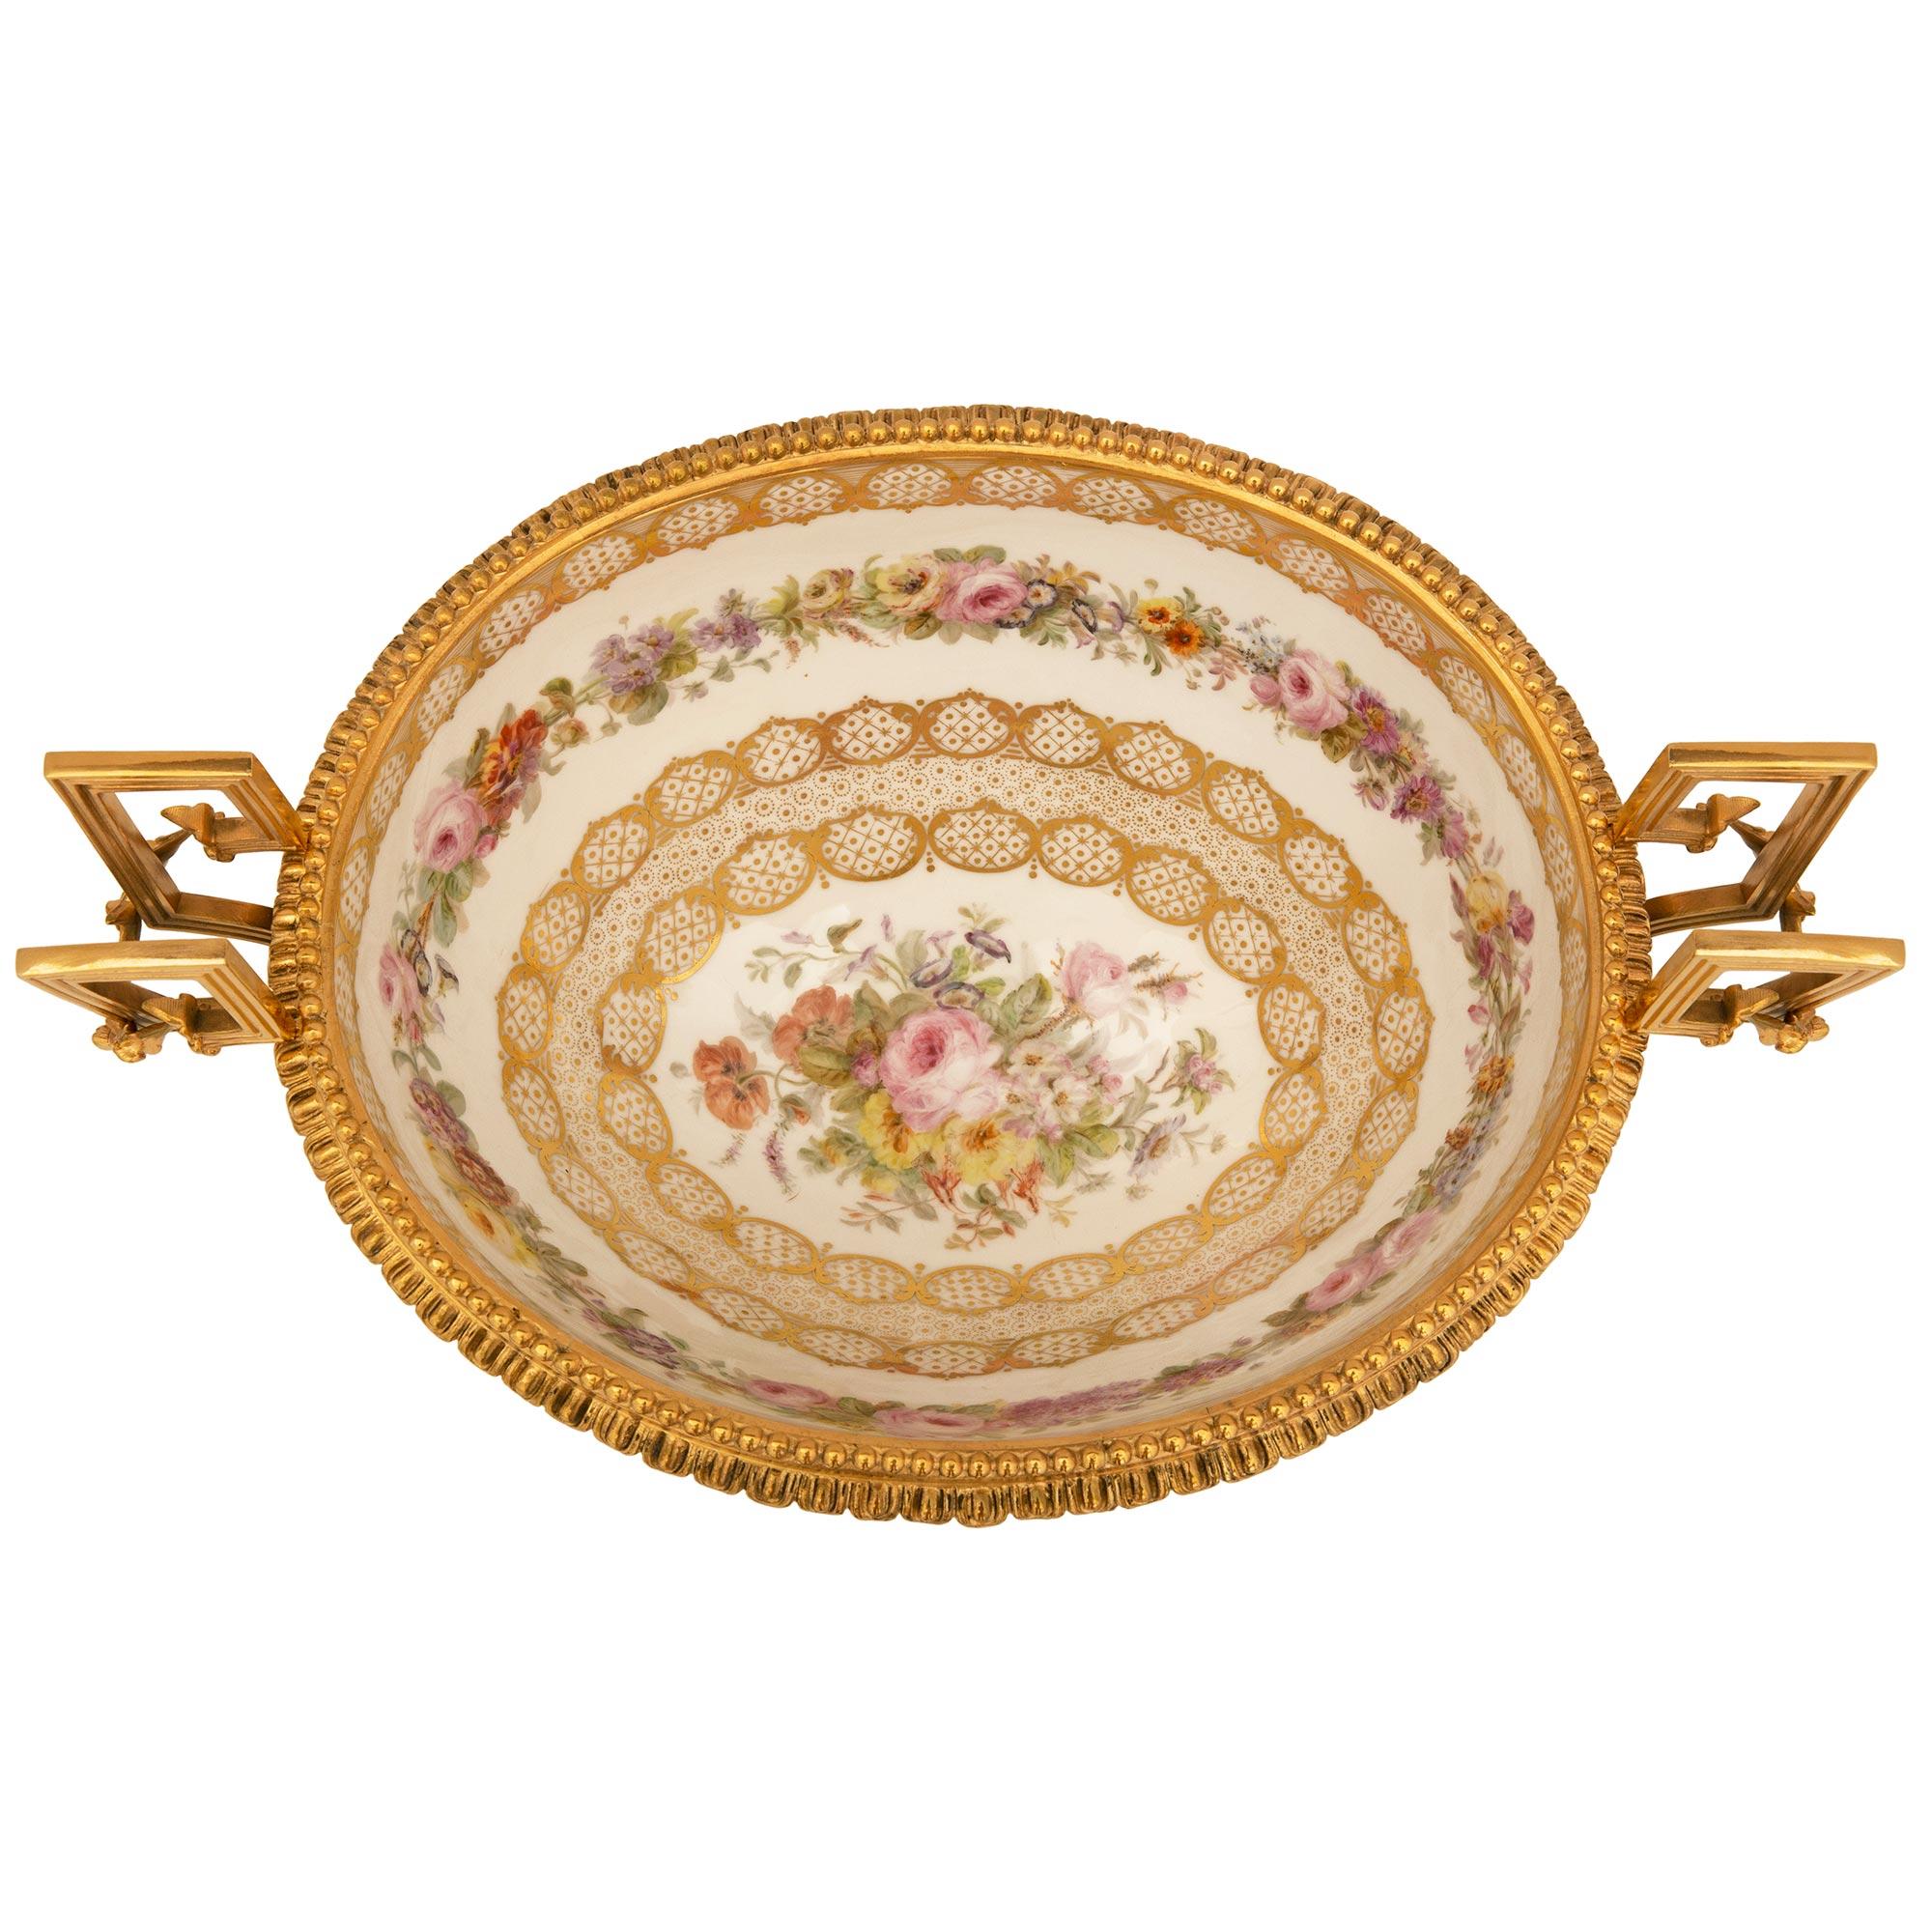 A stunning and very high quality French 19th century Louis XVI St. ormolu and Sevres porcelain centerpiece. The centerpiece is raised by an elegant ormolu base with fine foliate feet, beautiful richly chased frolicking lovebirds and a striking